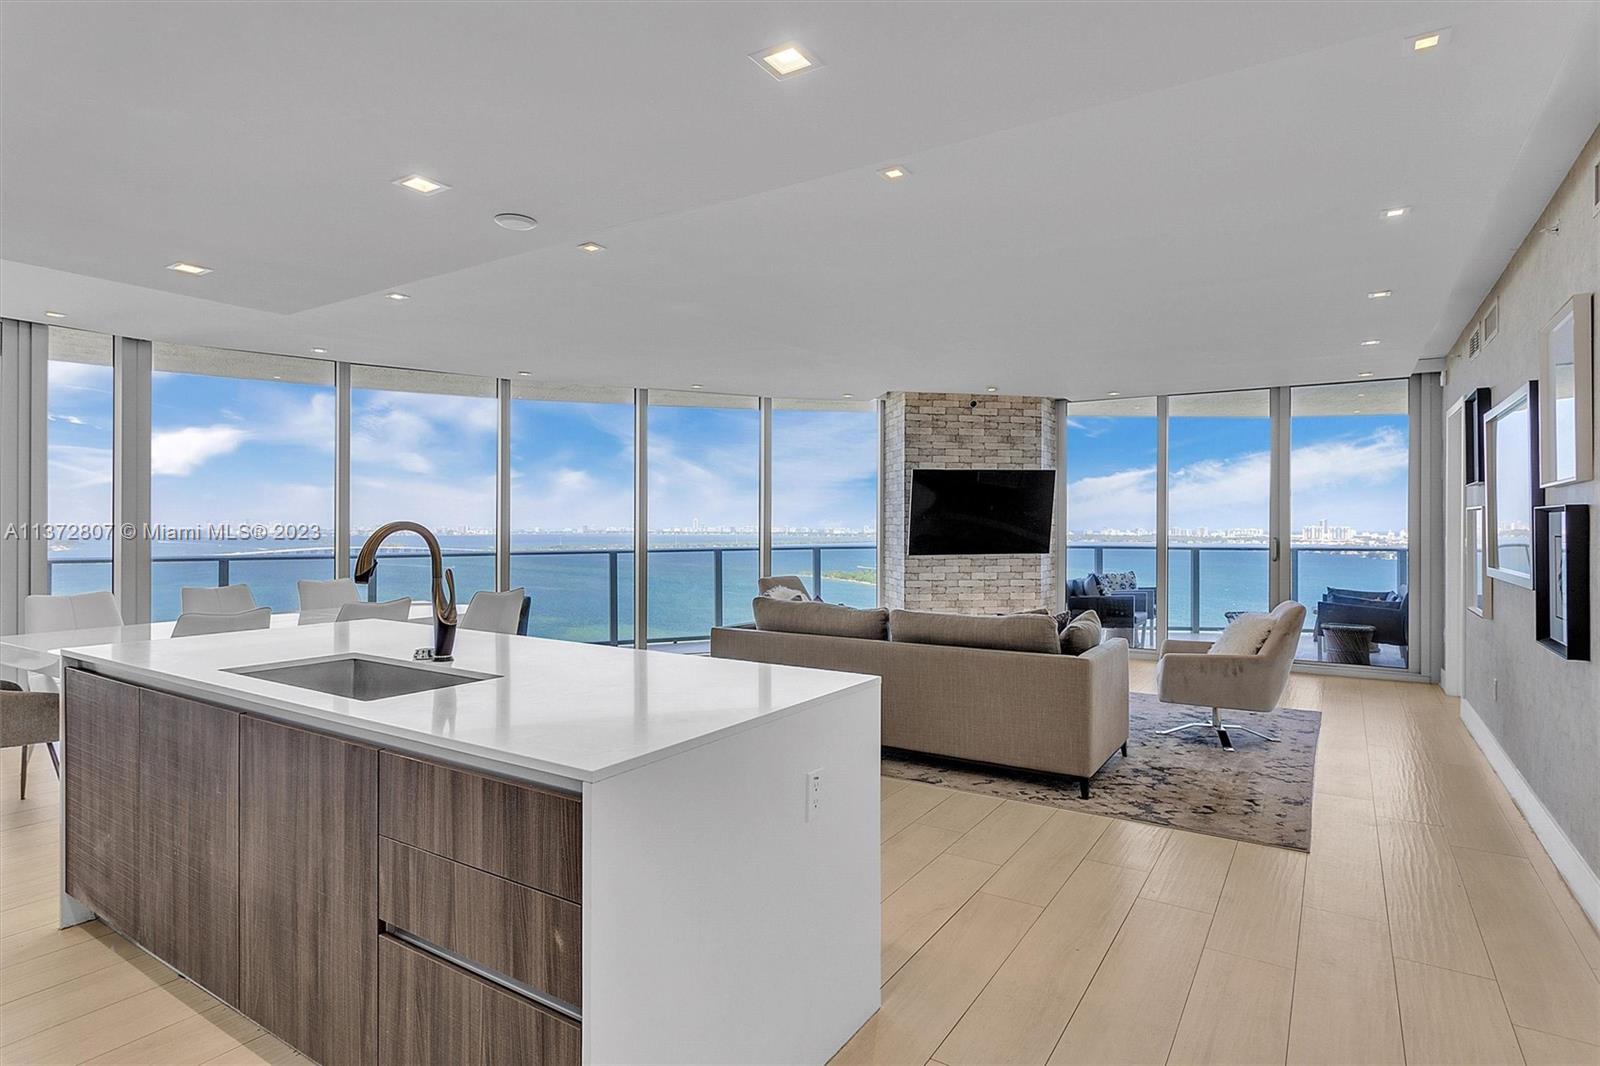 One of a kind 3 beds/ 4 baths + den with breathtaking views of the Ocean, Miami Skyline & Miami Beach. Developer condo with owner upgraded finishes. Featuring private elevator / foyer with camera system logibeth in the foyer, living & dining room area, high ceilings, porcelain floors all throughout a wraparound balcony. Top of the line appliances,smart locks, bar cobinets, extra cooler and fridge, built-in closets, window treatments in all bedrooms and social area. Enjoy top amenities with sunset pools, kids/teen playroom, movie theater, conference rooms, fitness center and more. ALSO AVAILABLE FOR RENT.